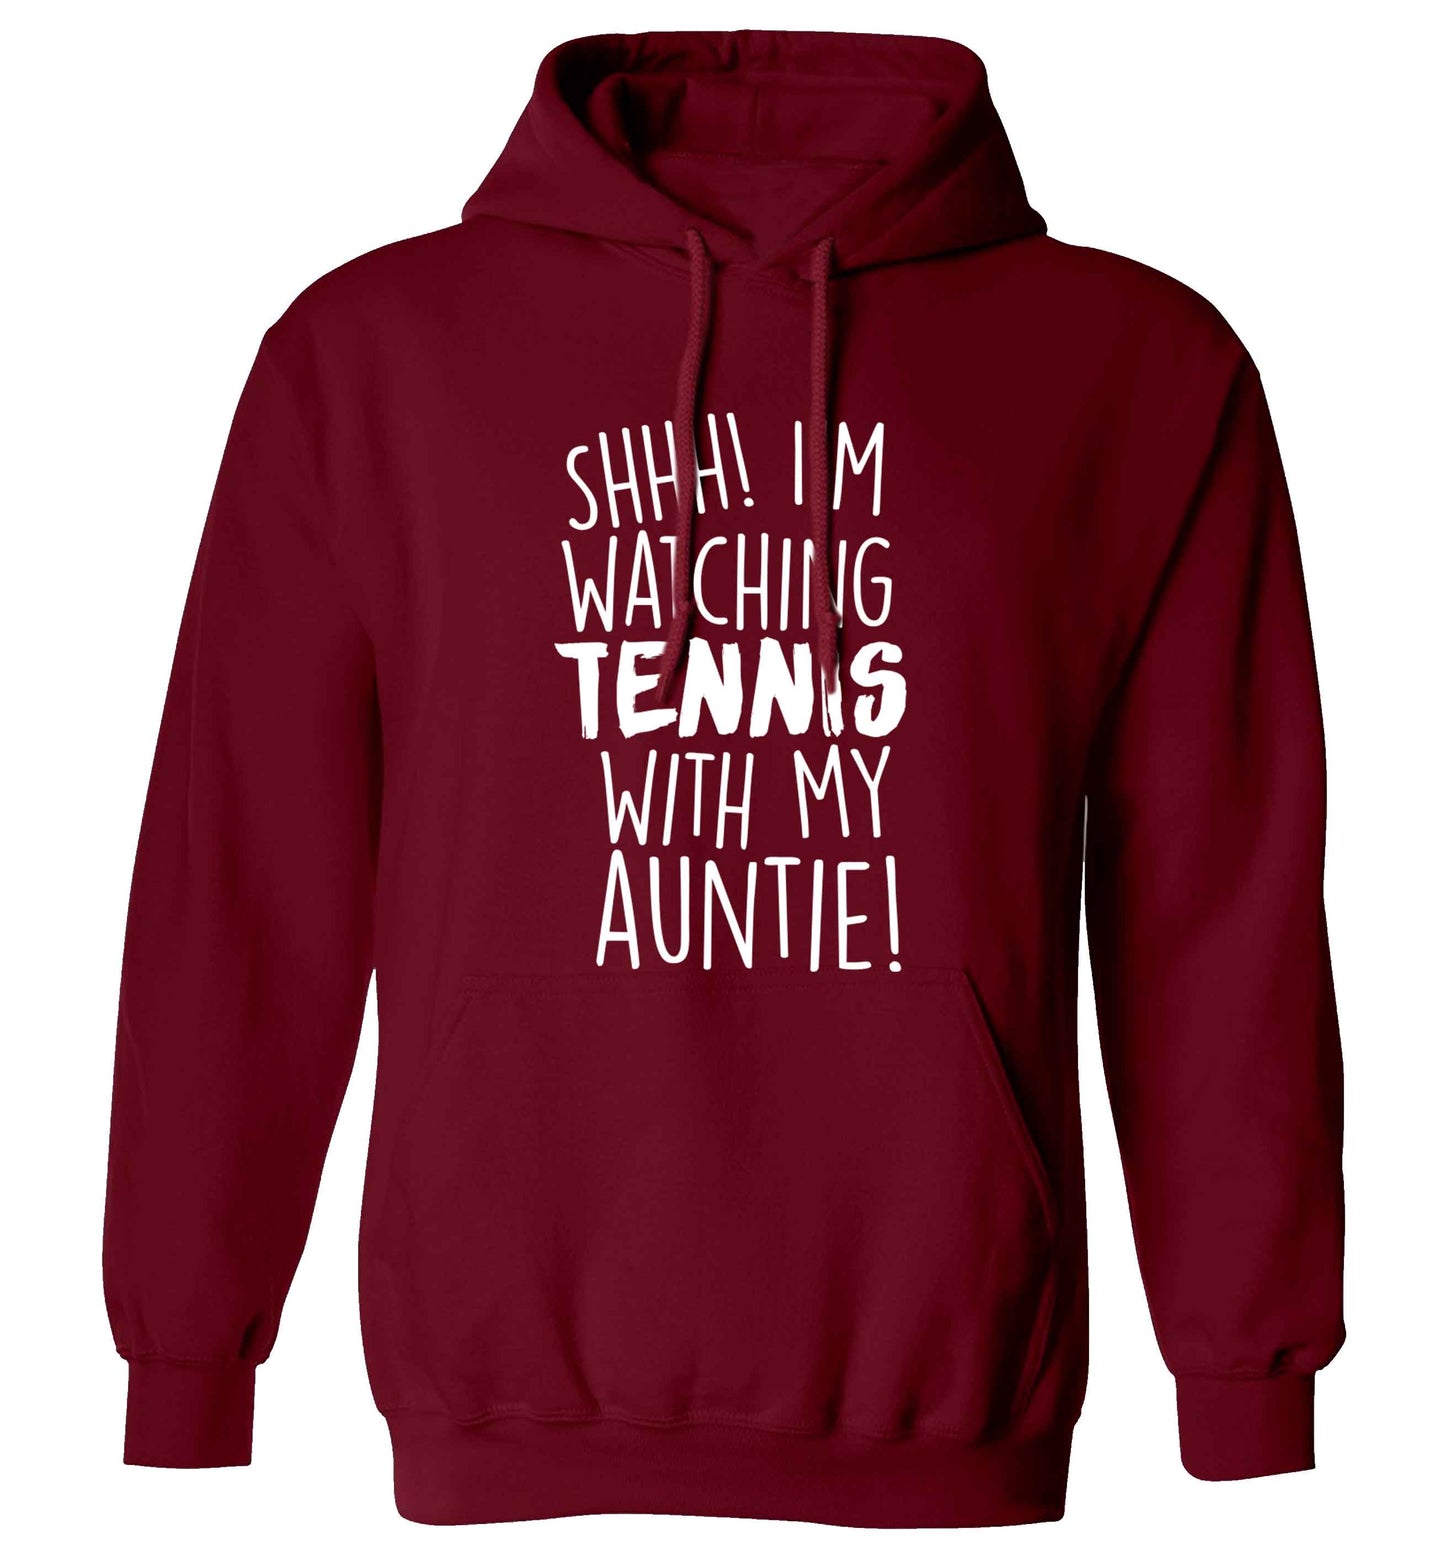 Shh! I'm watching tennis with my auntie! adults unisex maroon hoodie 2XL